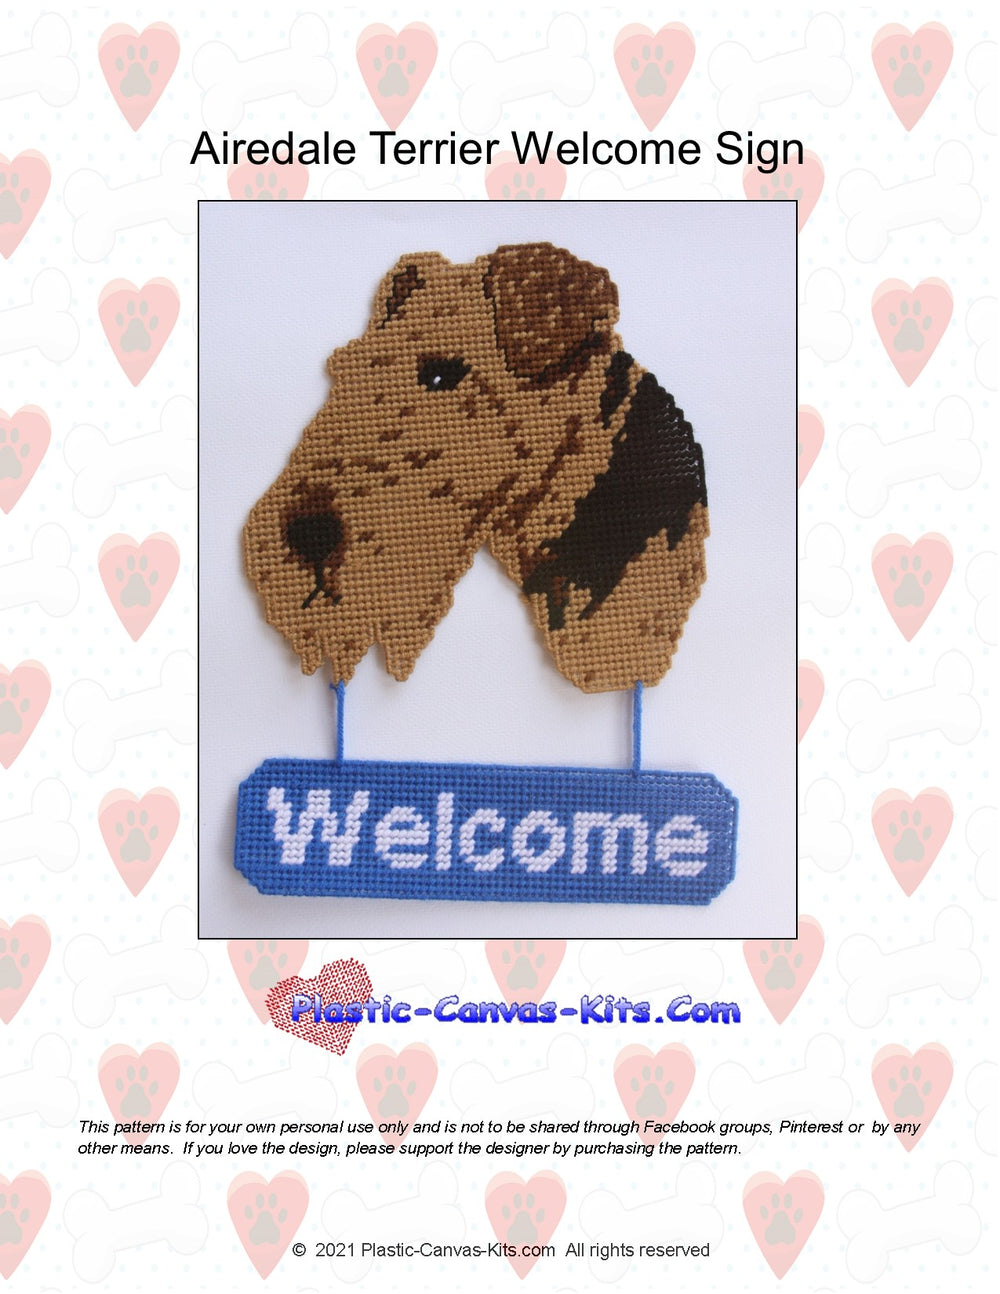 Airedale Terrier Welcome Sign